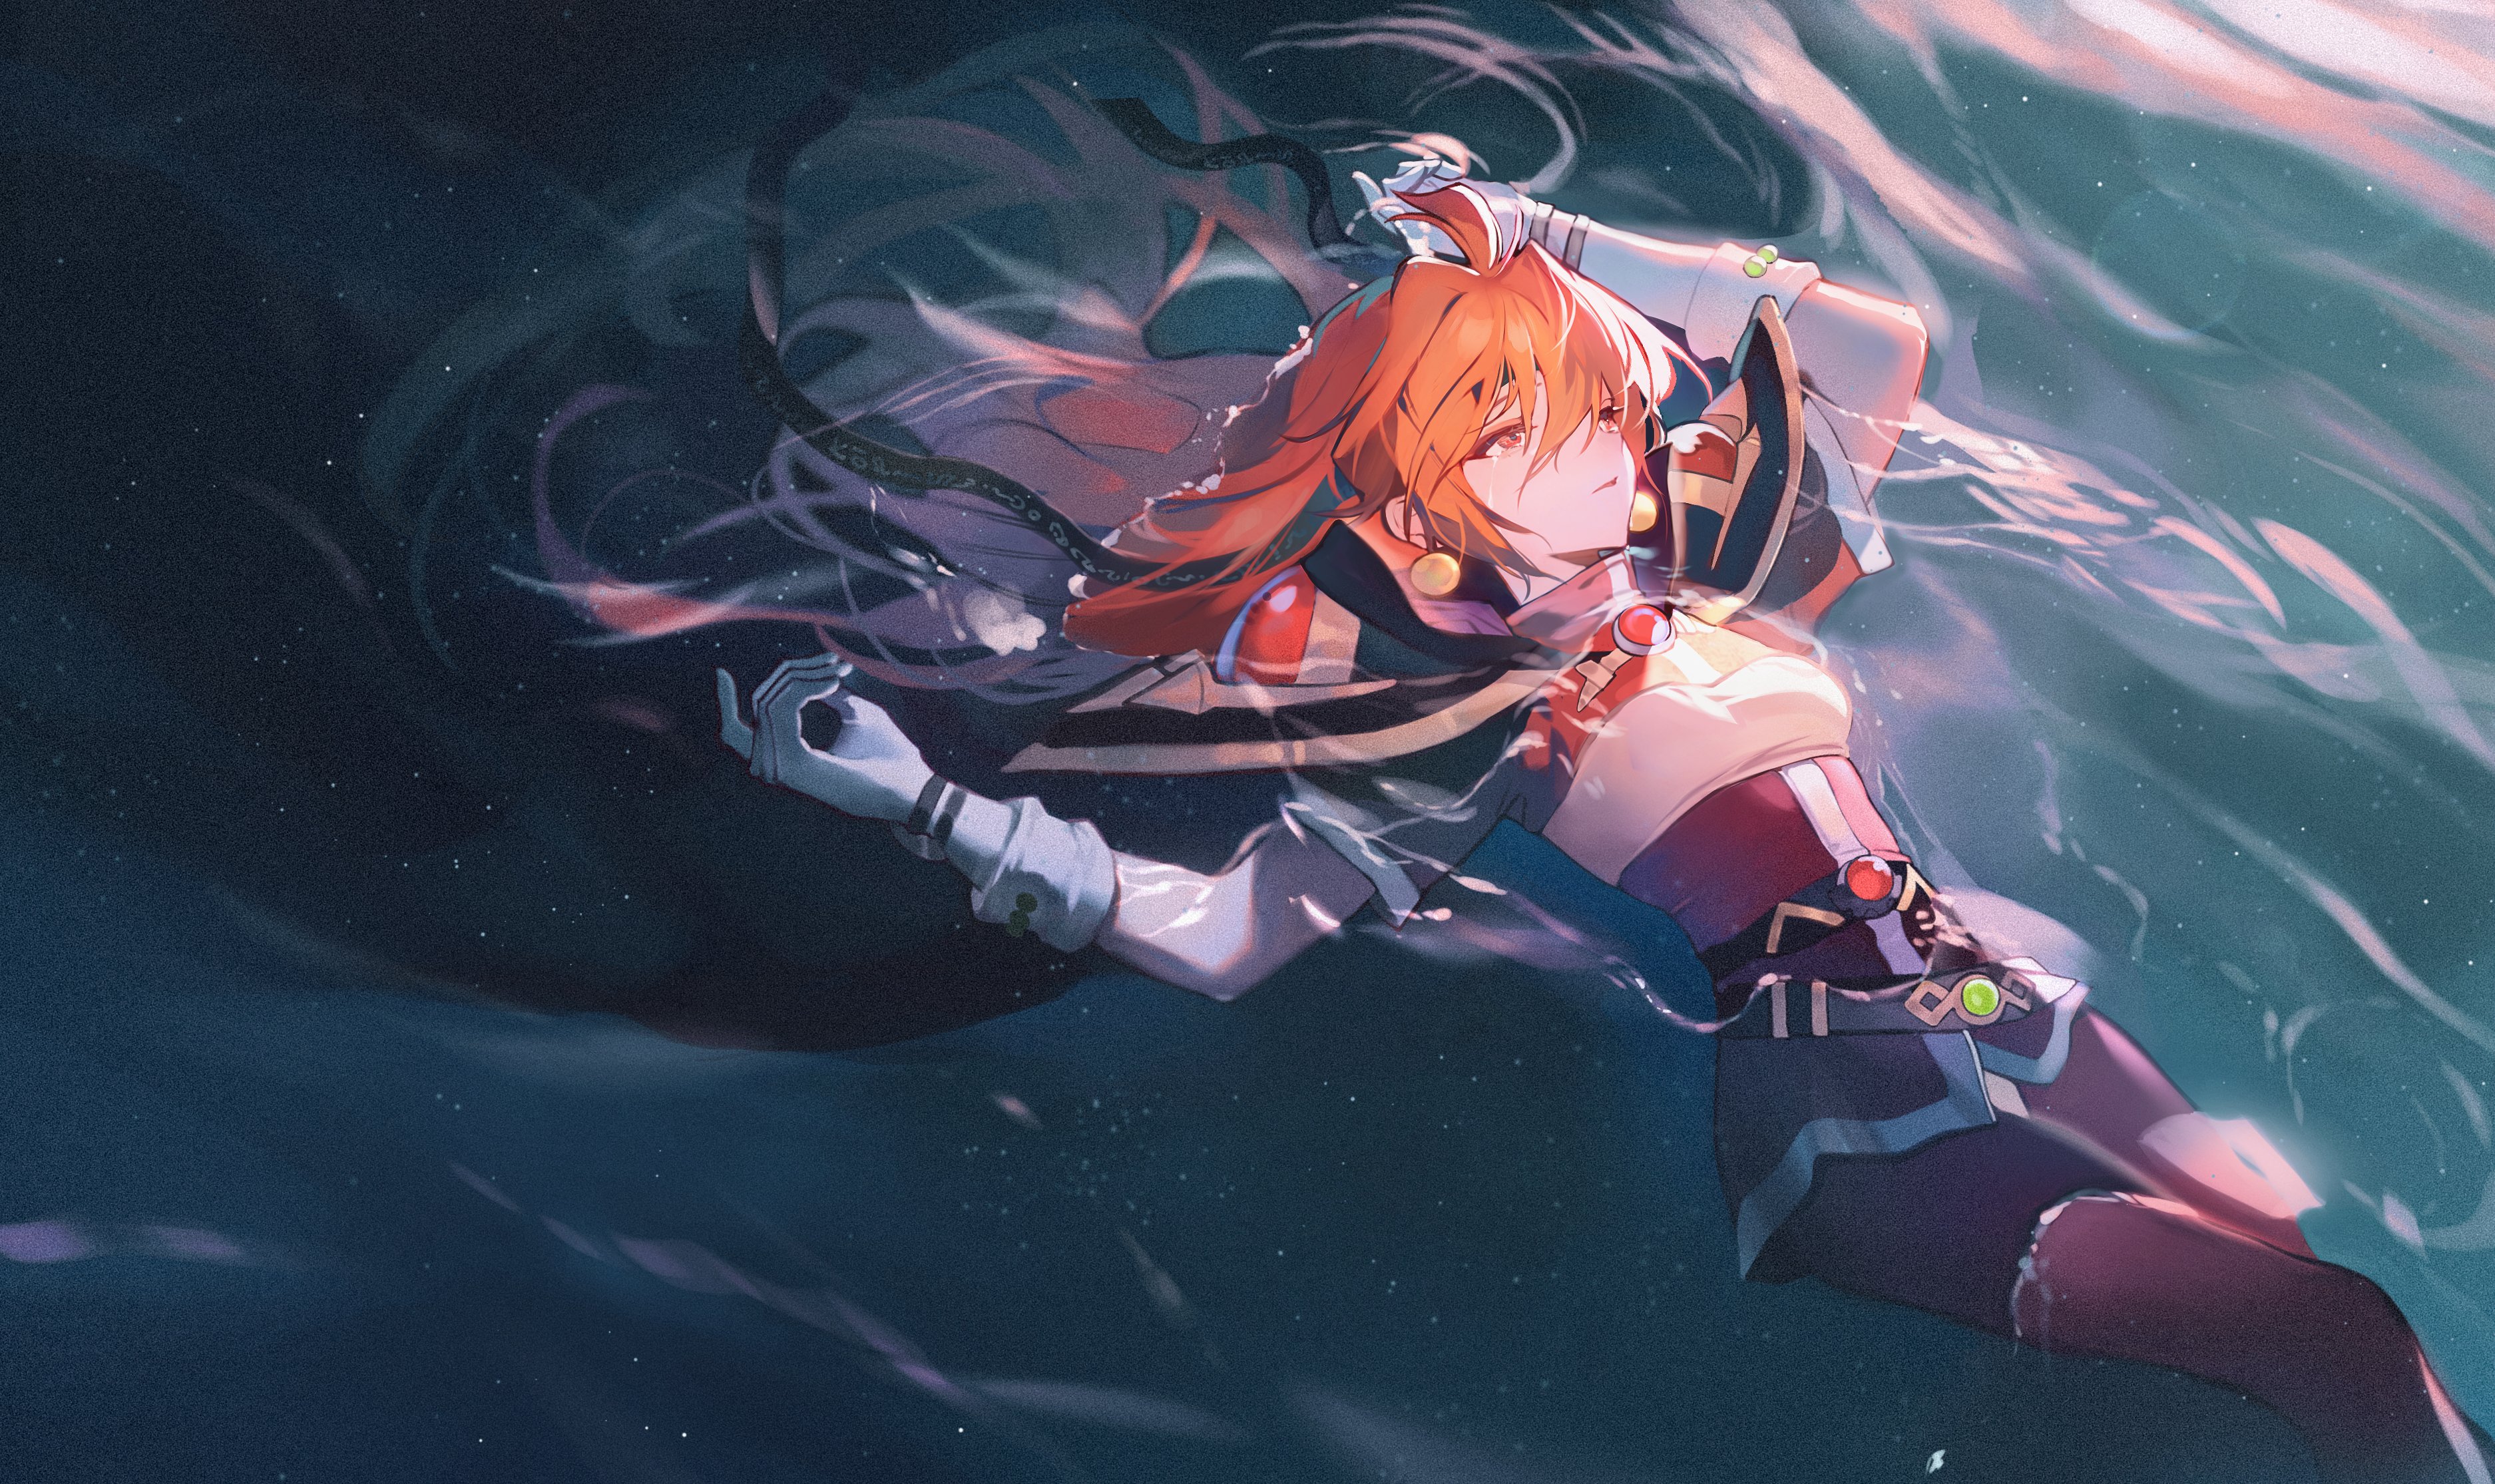 Anime Girls Lina Inverse Slayers Magician Witch Jewelry Jewel Shoulder Pads Cape Skirt Gloves White  3748x2230